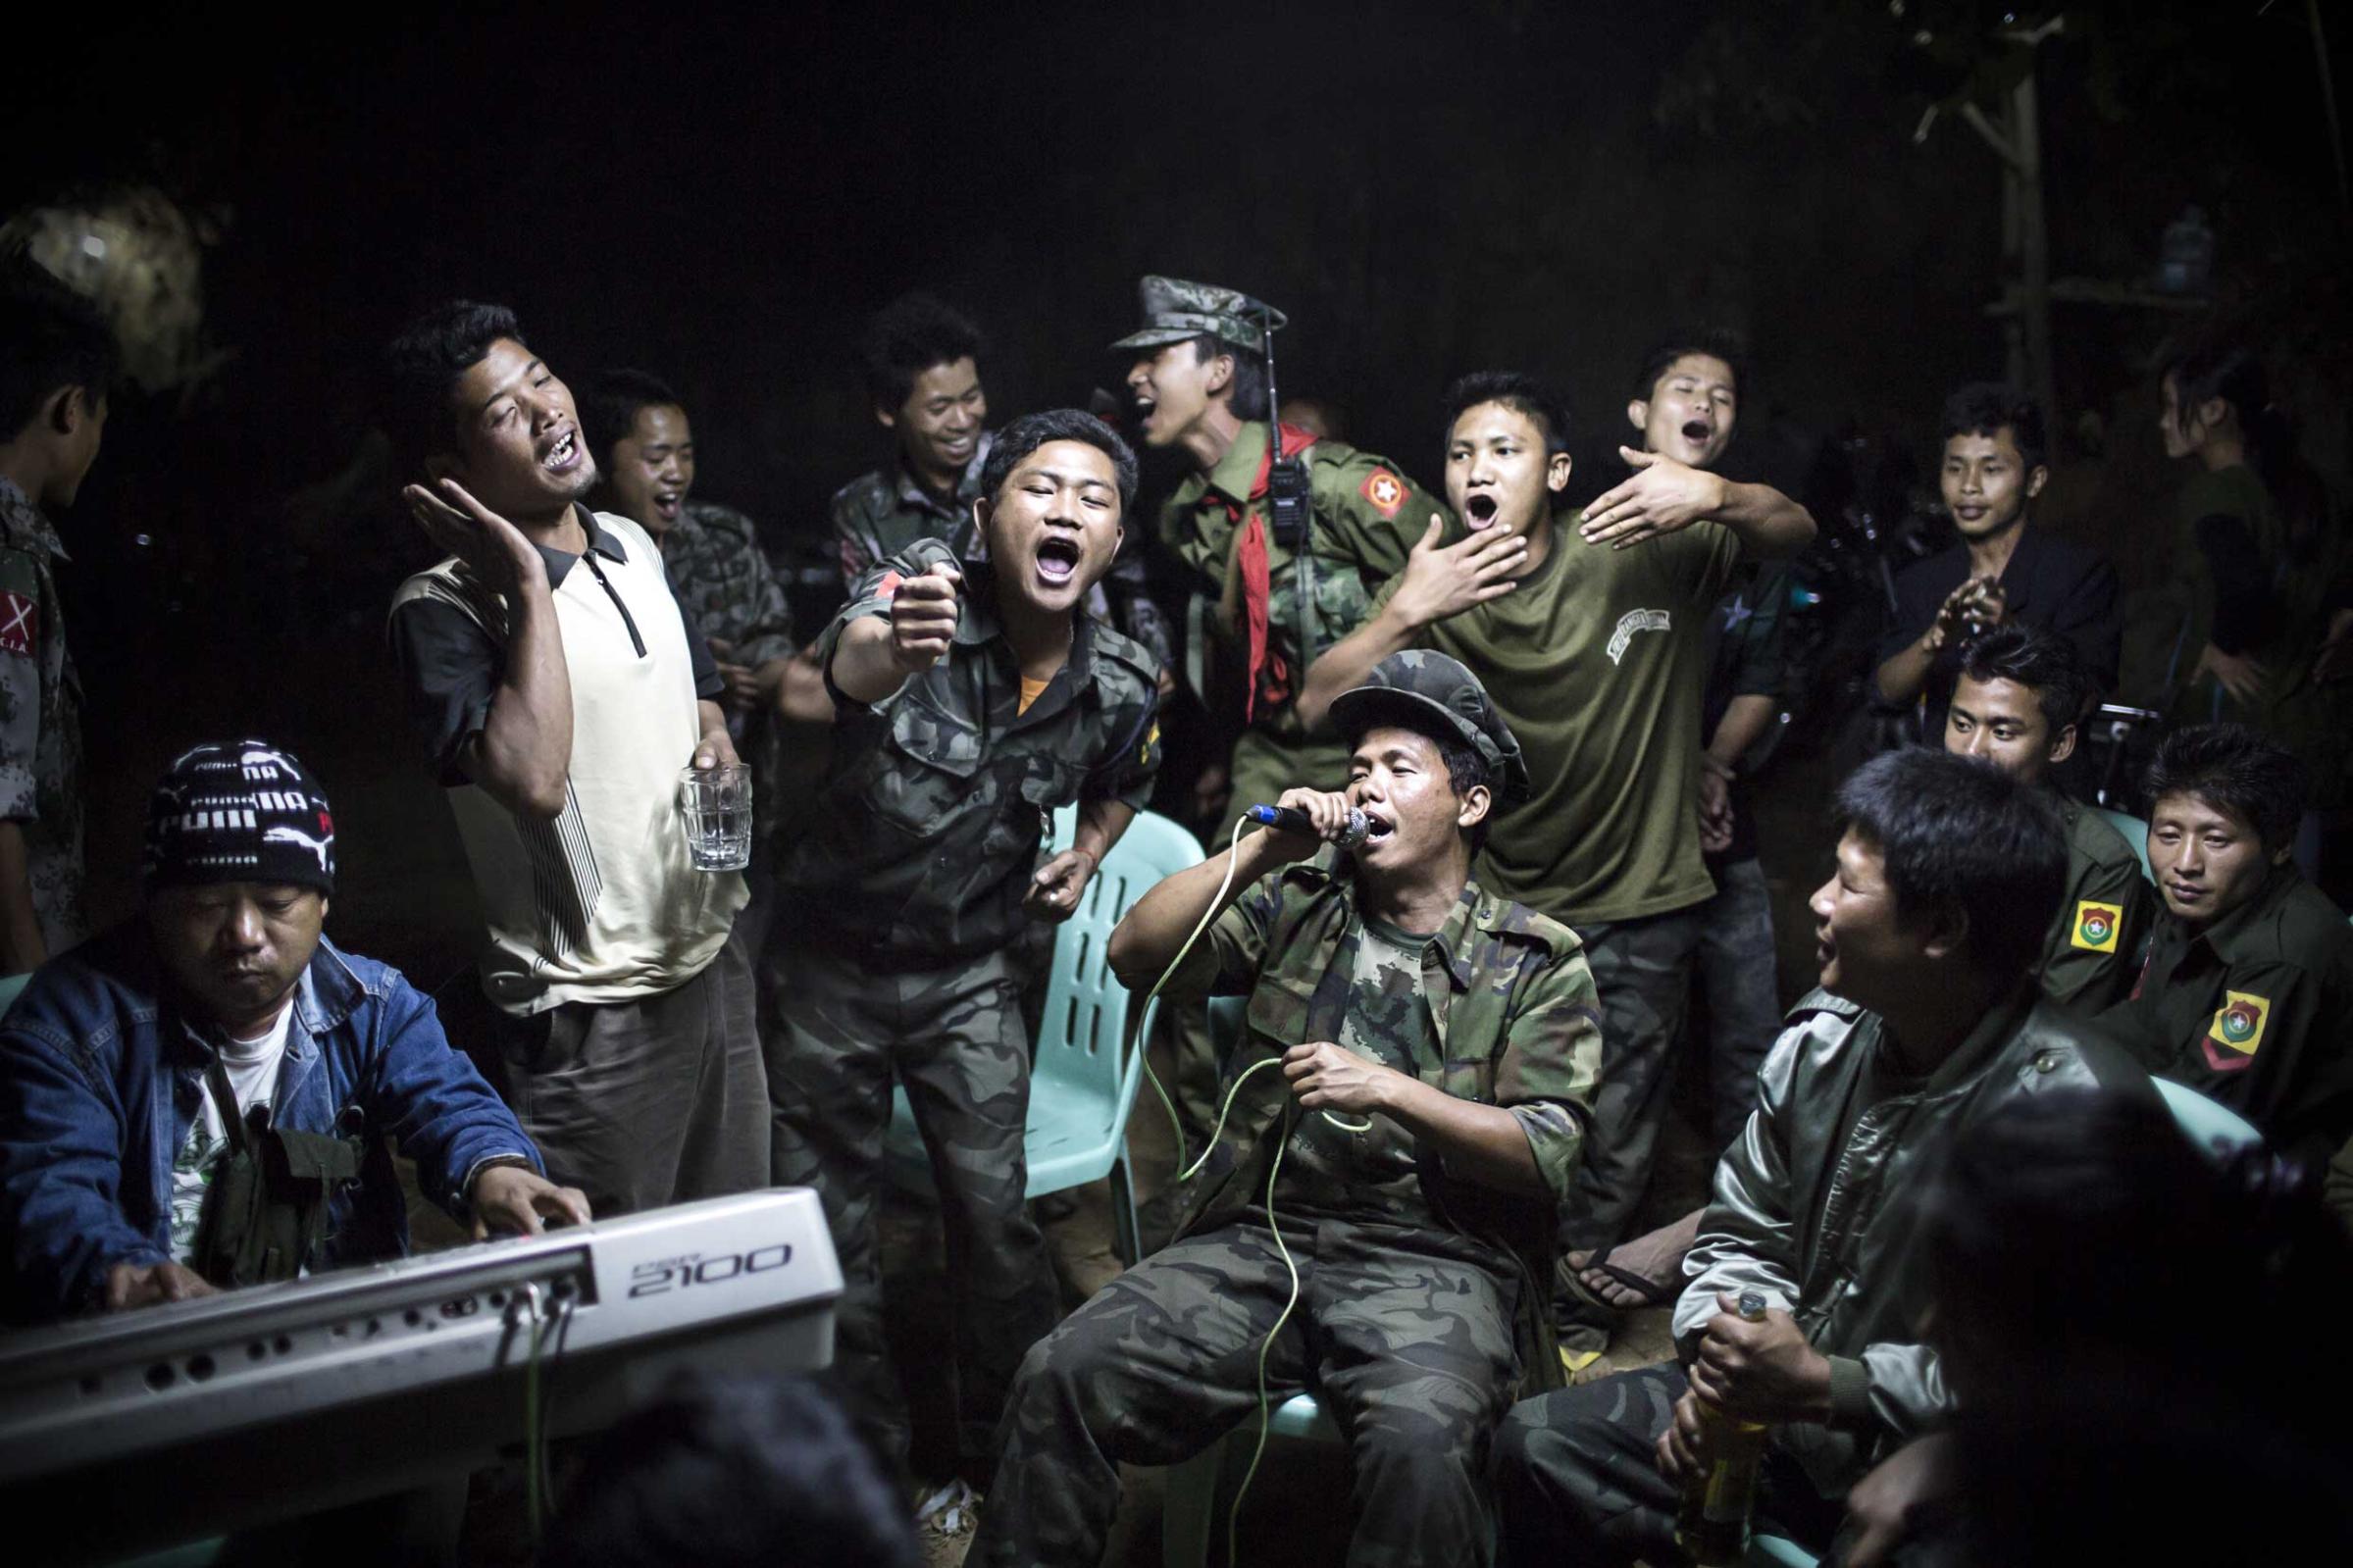 1st Prize Daily Life Single. 15 March 2013, Burma. Kachin Independence Army fighters are drinking and celebrating at a funeral of one of their commanders who died the day before. The city is under siege by the Burmese army.